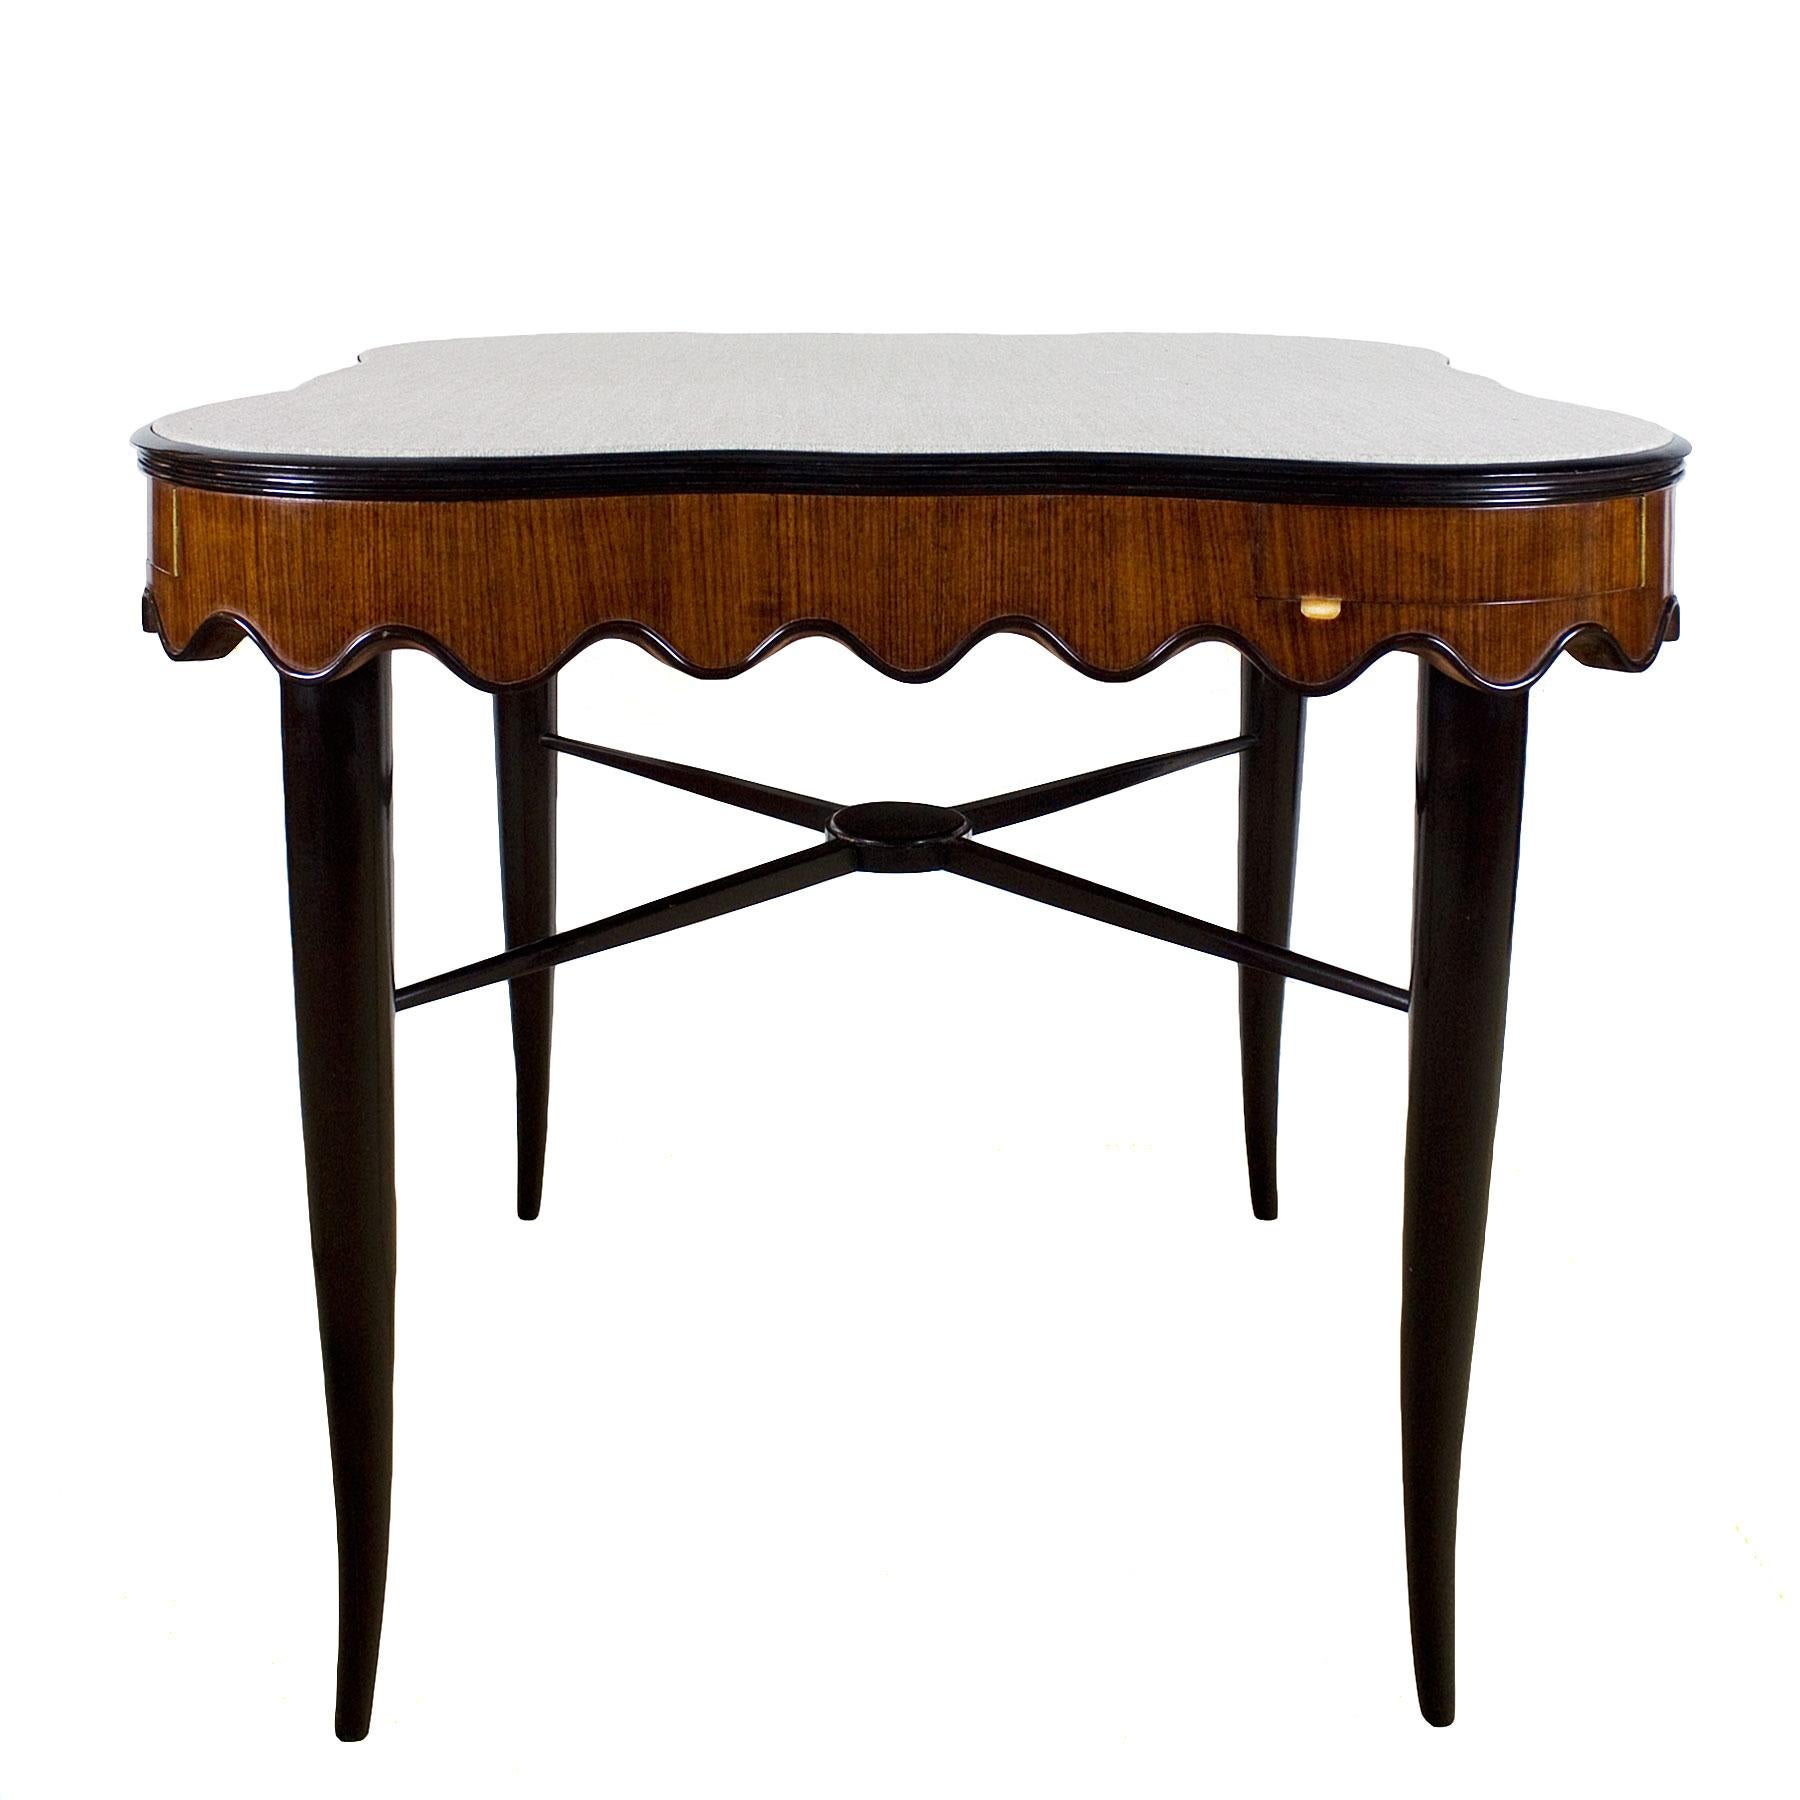 Charming game table, solid stained mahogany stands with crossbar, mahogany undulating ring base, corner drawers with brass handles, French polish. Gray felt on top (could be changed),

Italy, circa 1940.